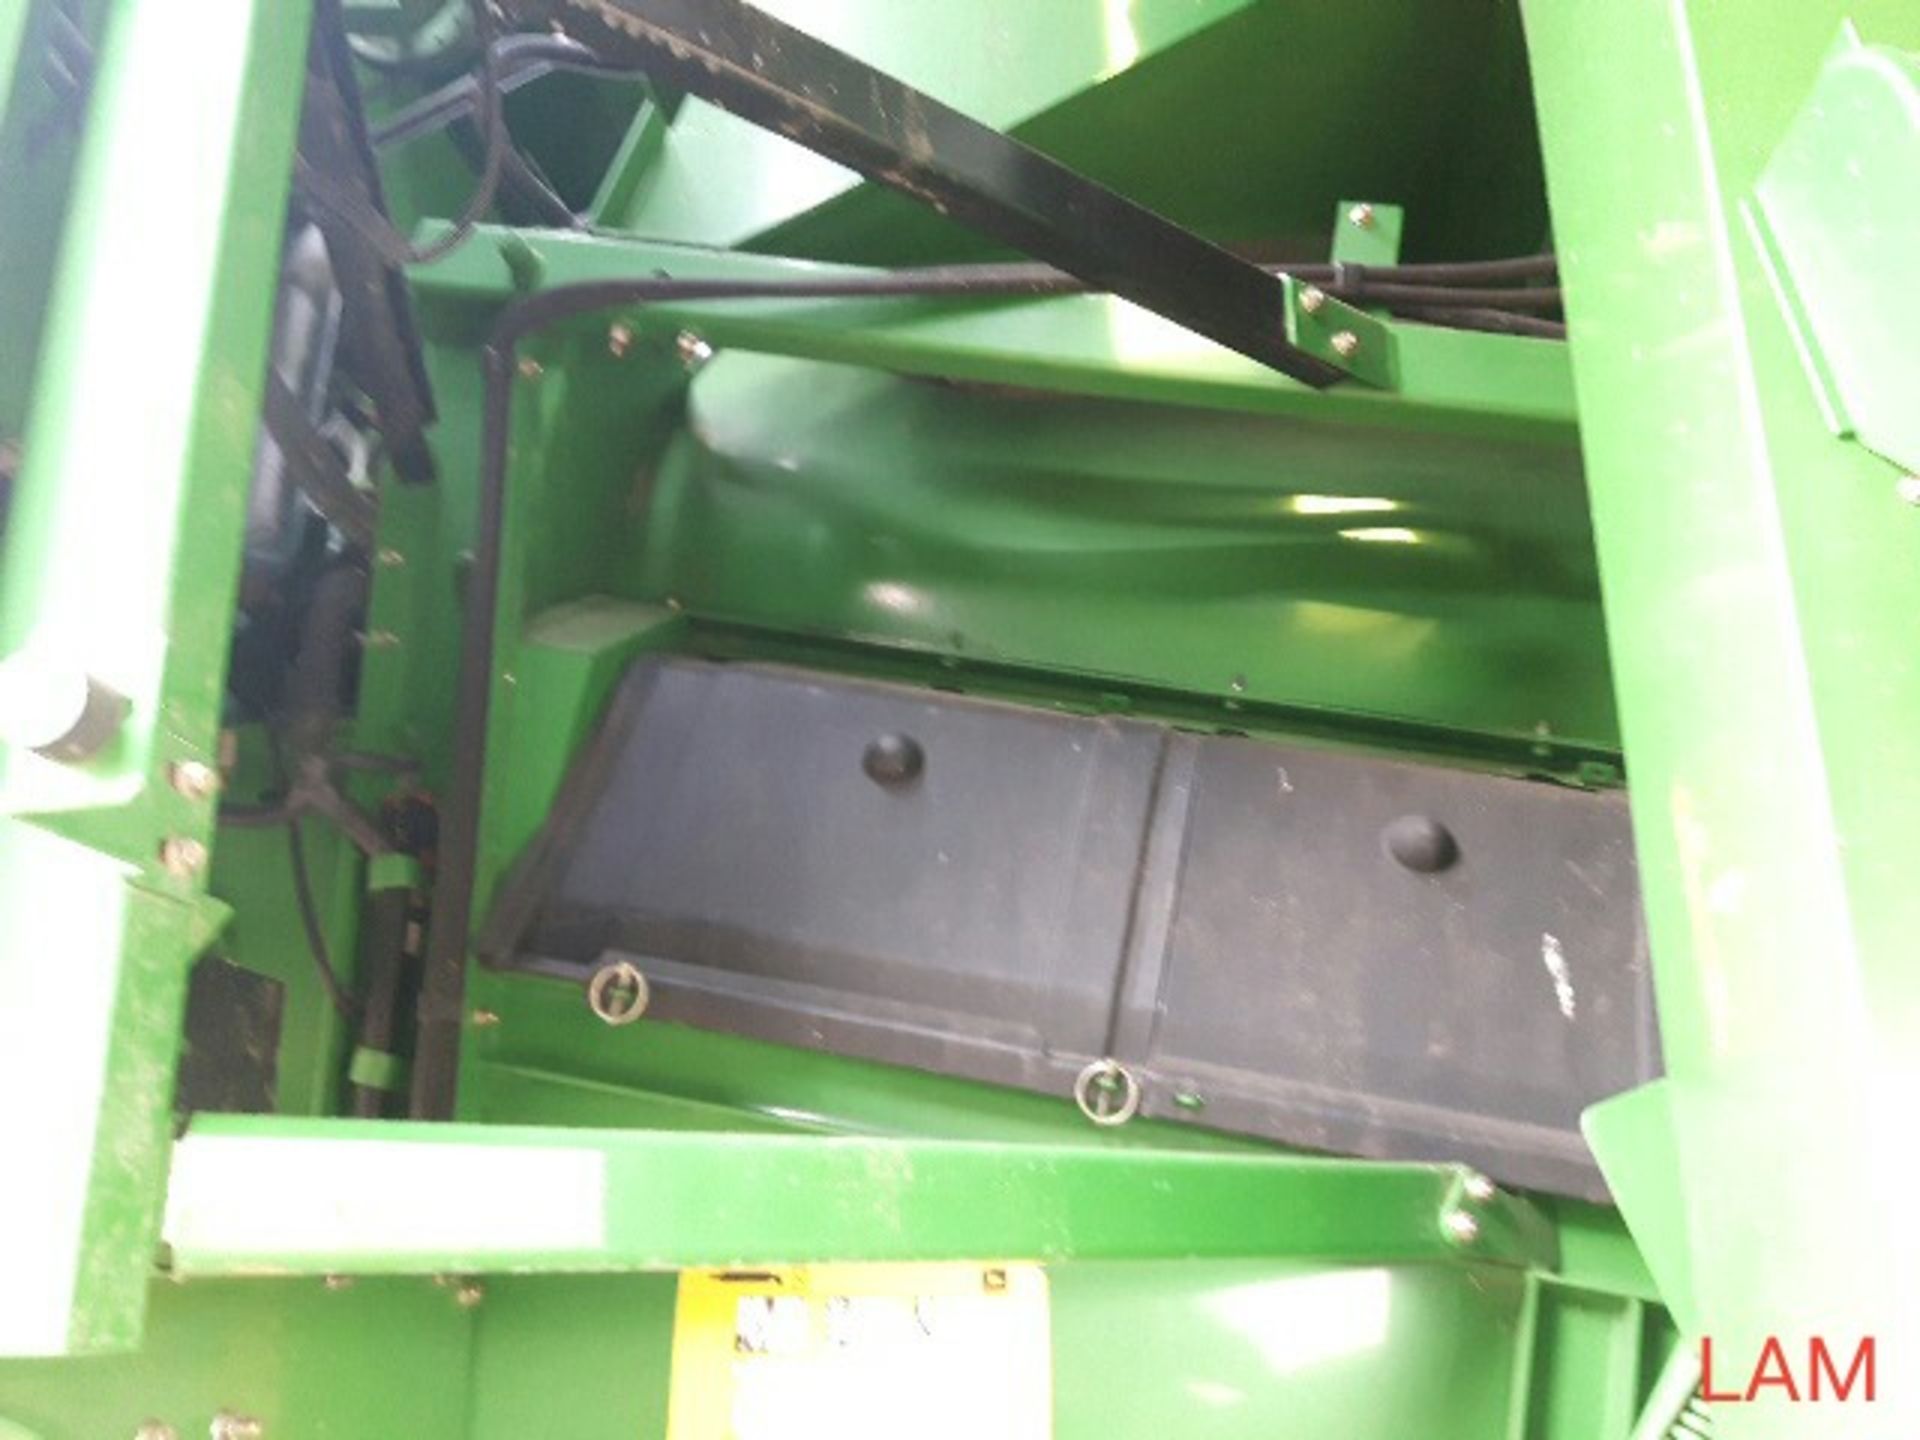 2001 STS 9650 JD Combine sn H09650S692245 3763 eng hrs, 3000 sep hrs, 800/65 R32 fr, 1.4-26 rr, c/ - Image 10 of 30